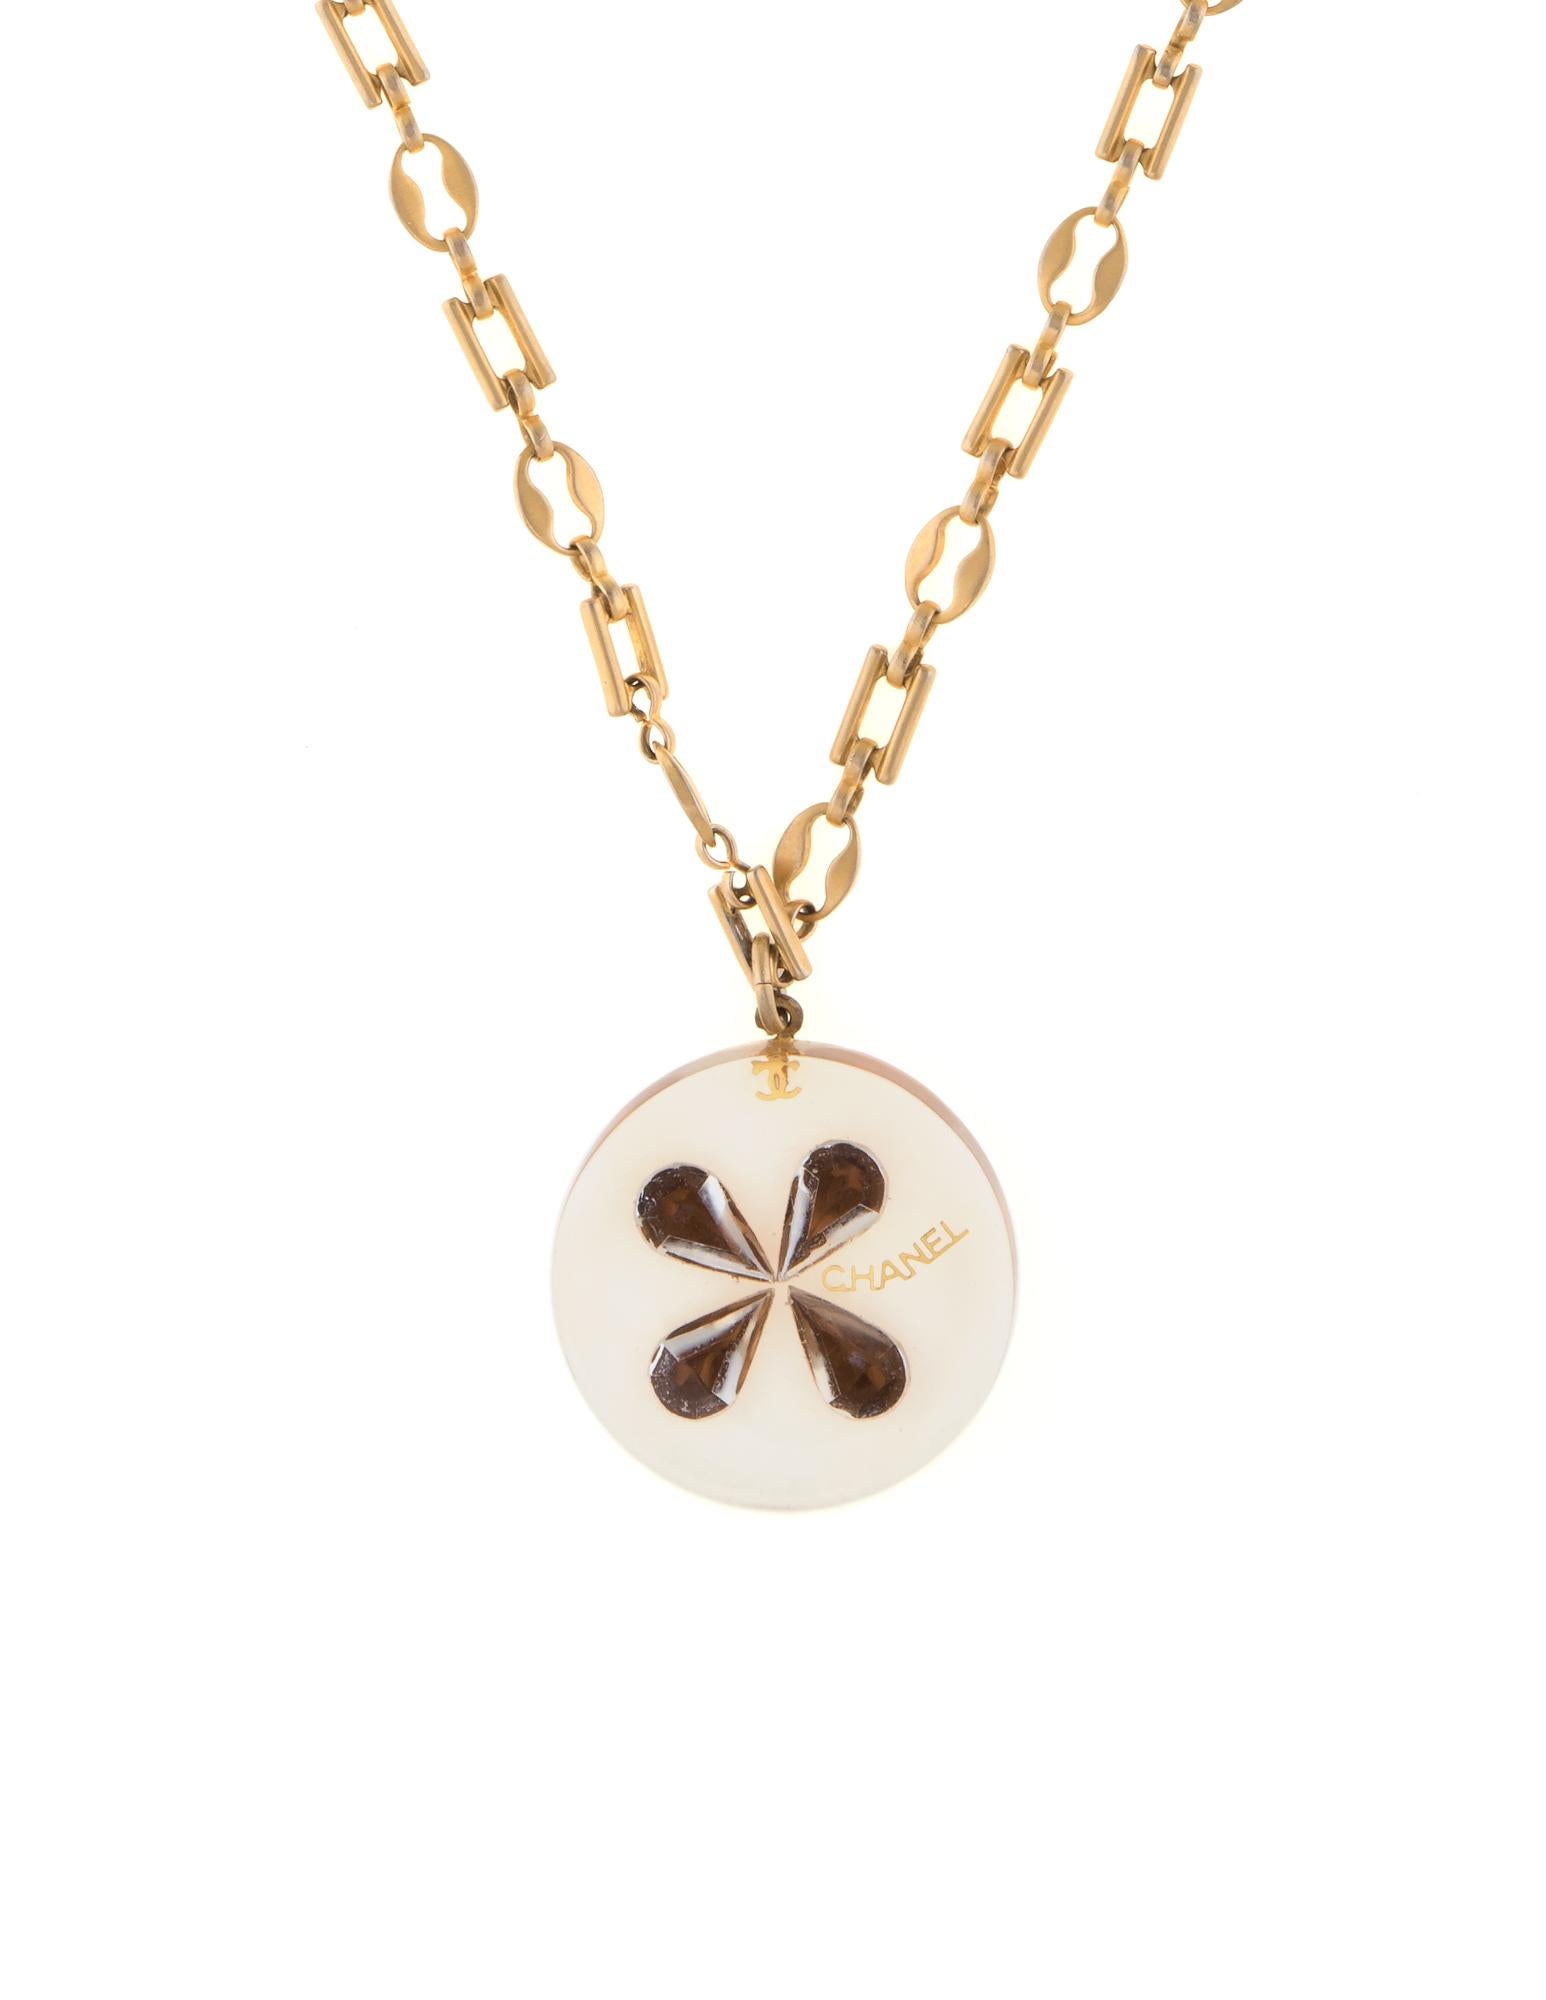 Chanel Resin Clover Pendant Necklace | Rent Chanel jewelry for $55/month -  Join Switch